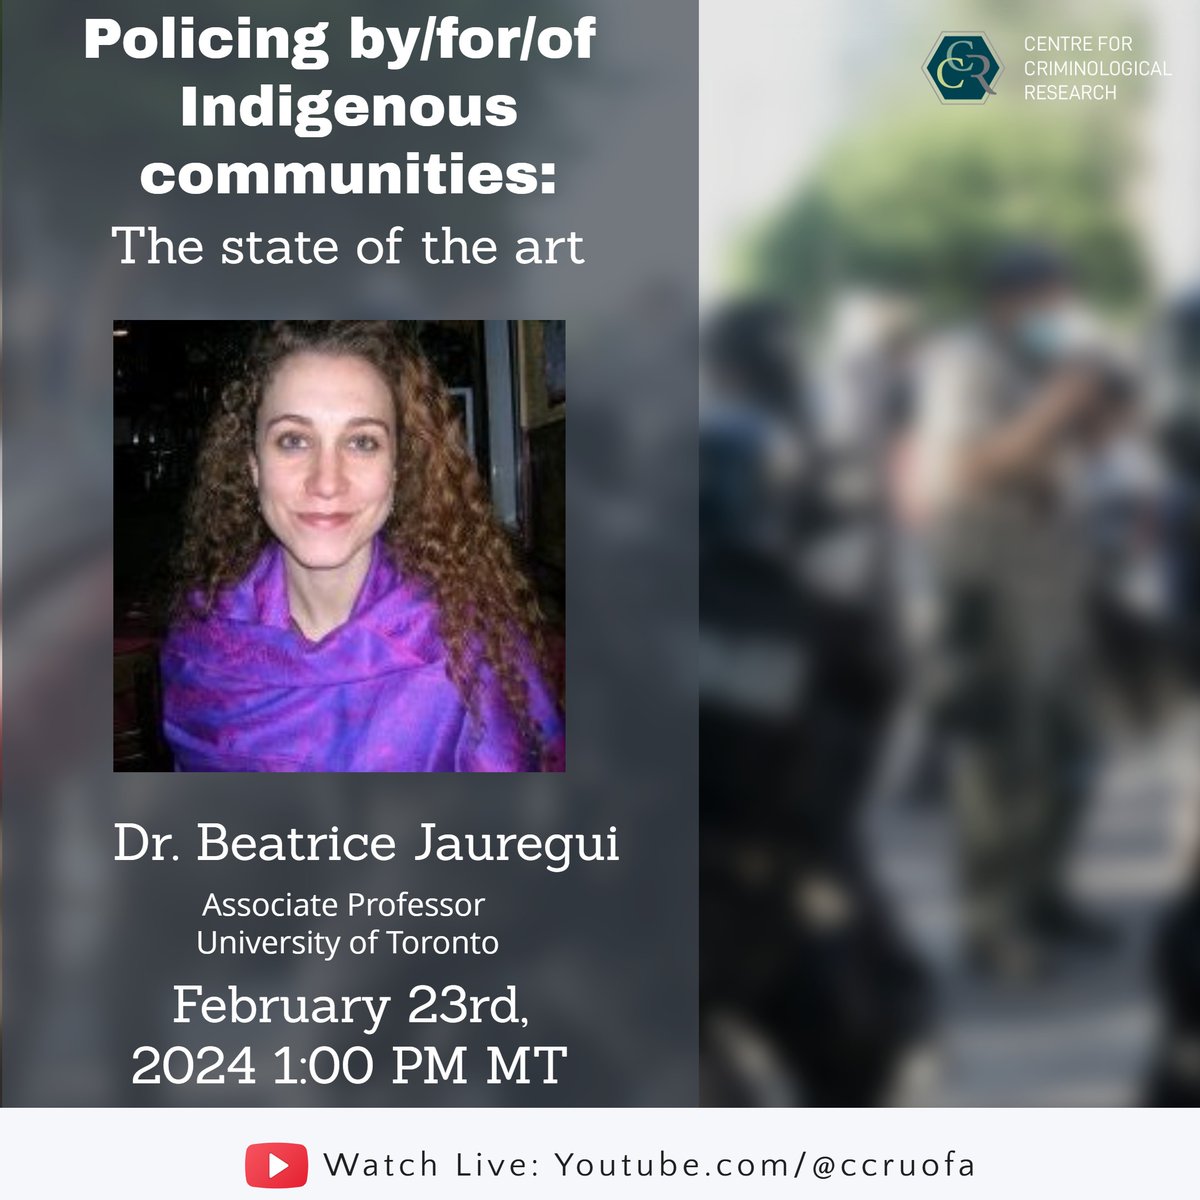 This coming Friday, Feb 23, at 1:00 pm MT, we will be hosting a talk by Dr. Beatrice Jauregui. Her talk is titled: Policing by/for/of Indigenous communities: The state of the art. Watch live on YT: youtube.com/live/m5VOsnRvc…